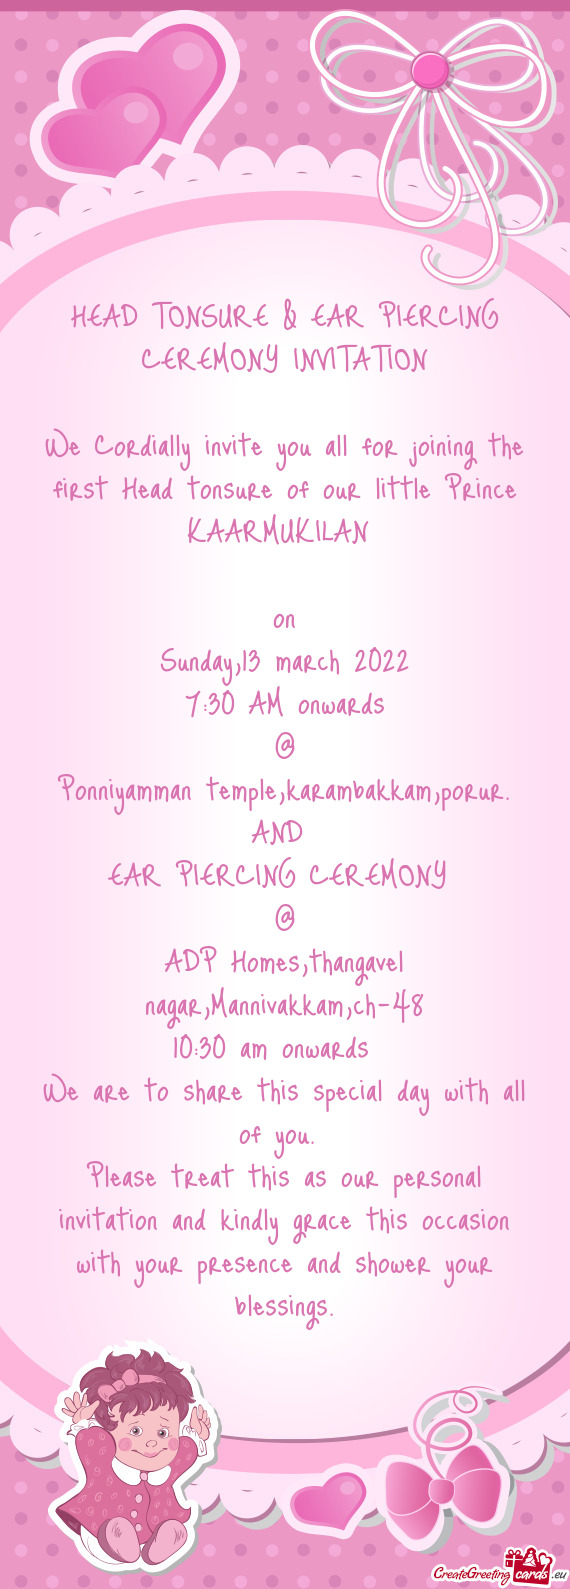 We Cordially invite you all for joining the first Head tonsure of our little Prince KAARMUKILAN